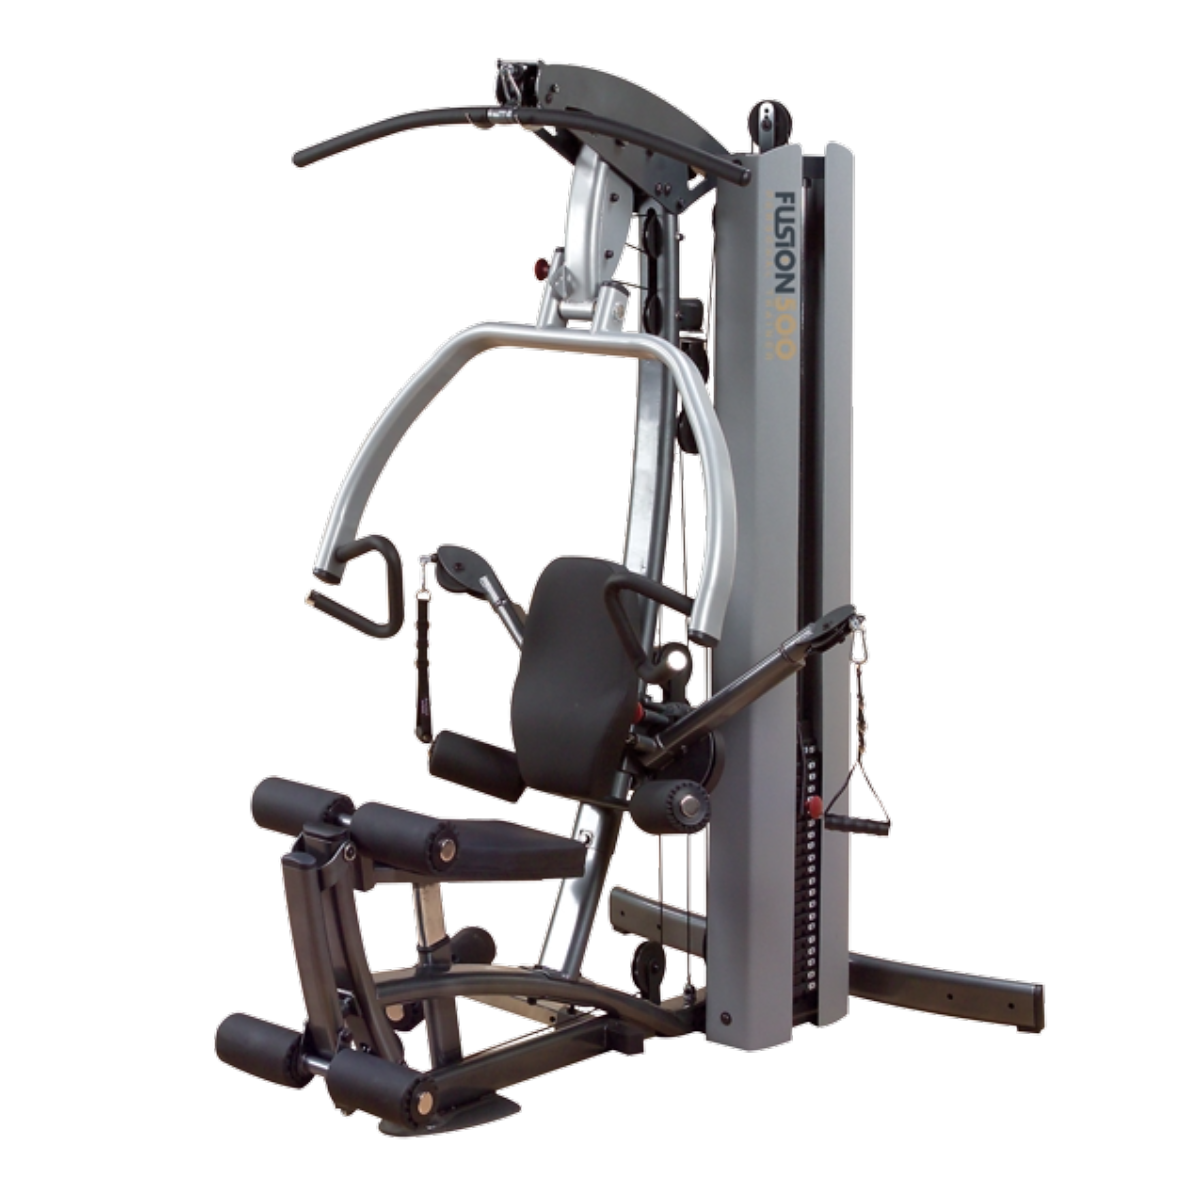 Body-Solid Powerline P2LPX210 Home Gym Equipment with Leg Press, 210 lbs. Weight Stack